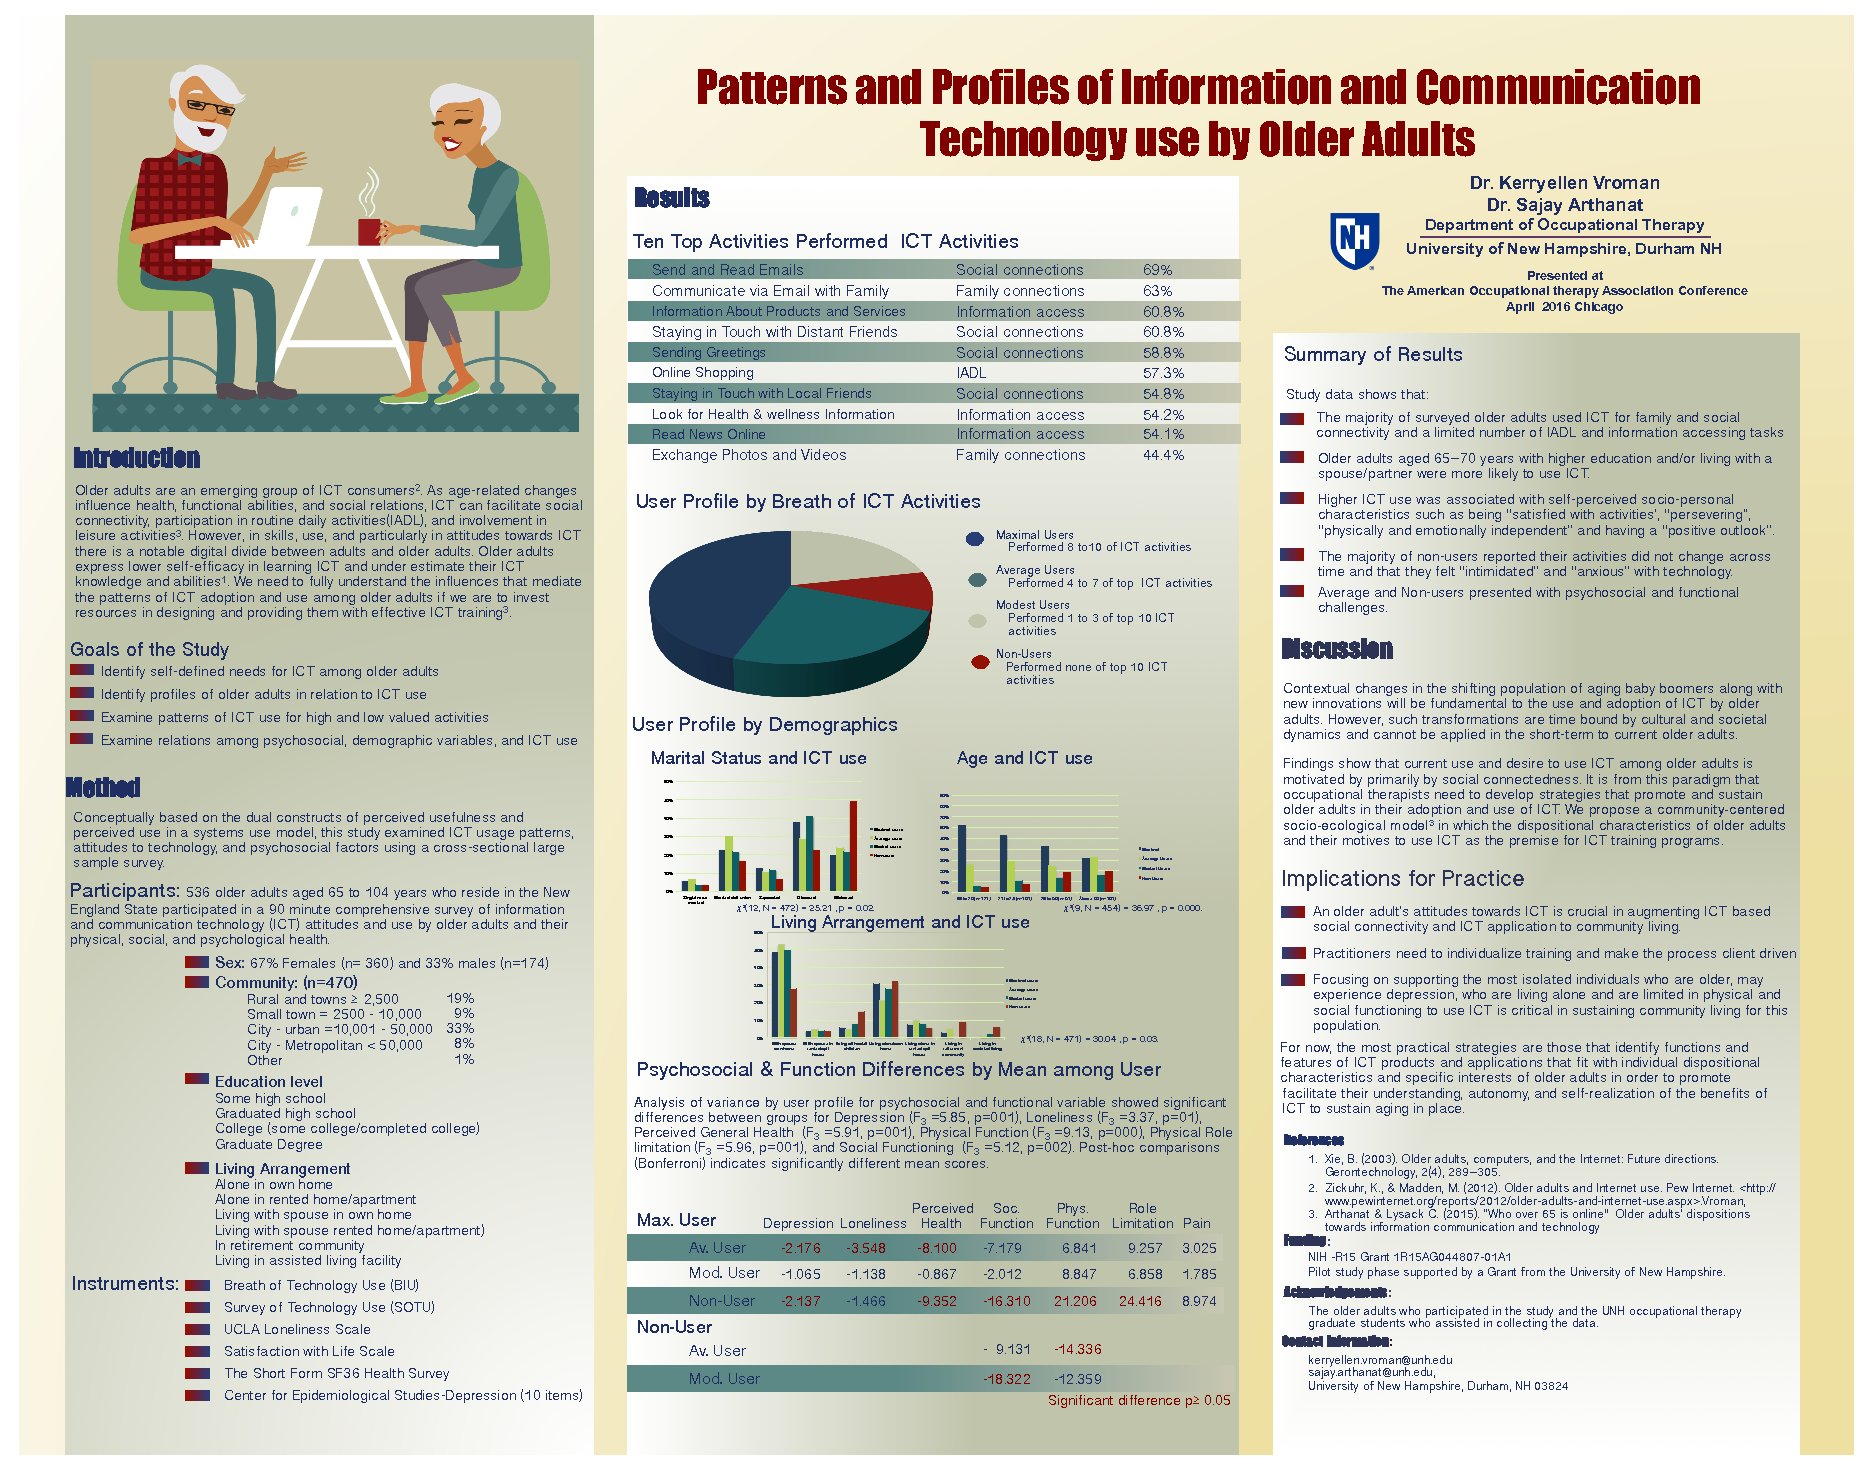 Patterns And Profiles Of Information And Communication Technology Use By Older Adults  by kgn3